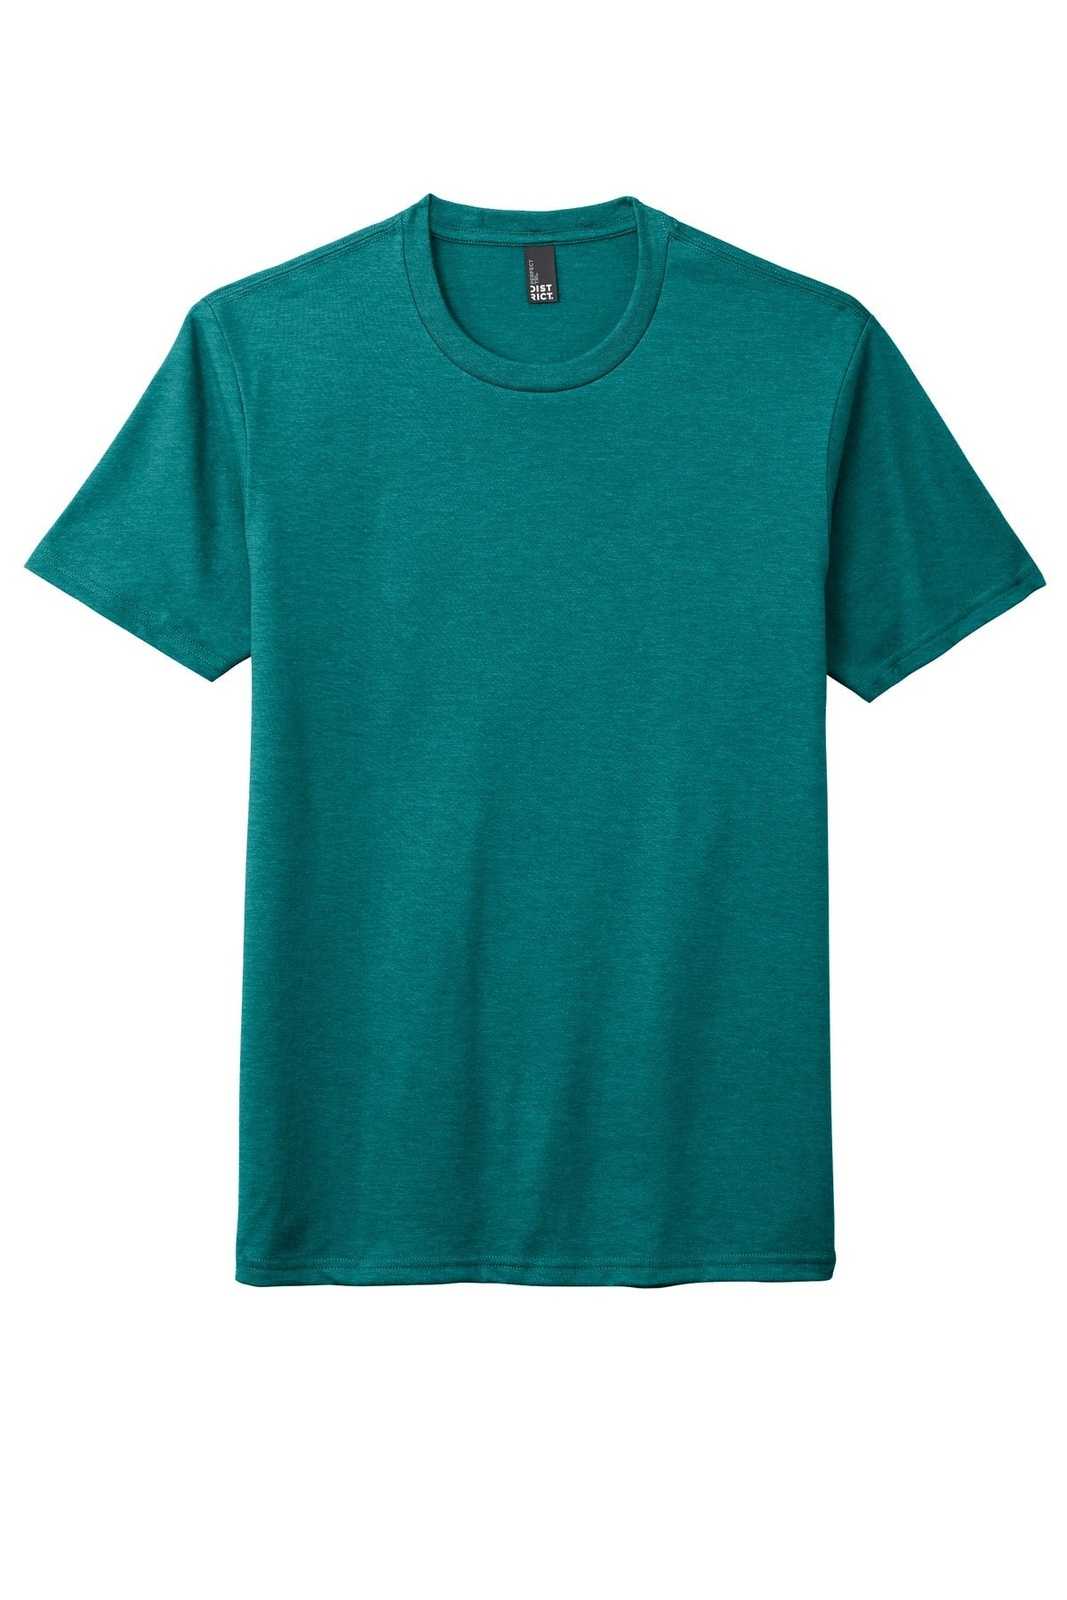 District DM130 Perfect Tri Tee - Heathered Teal - HIT a Double - 5